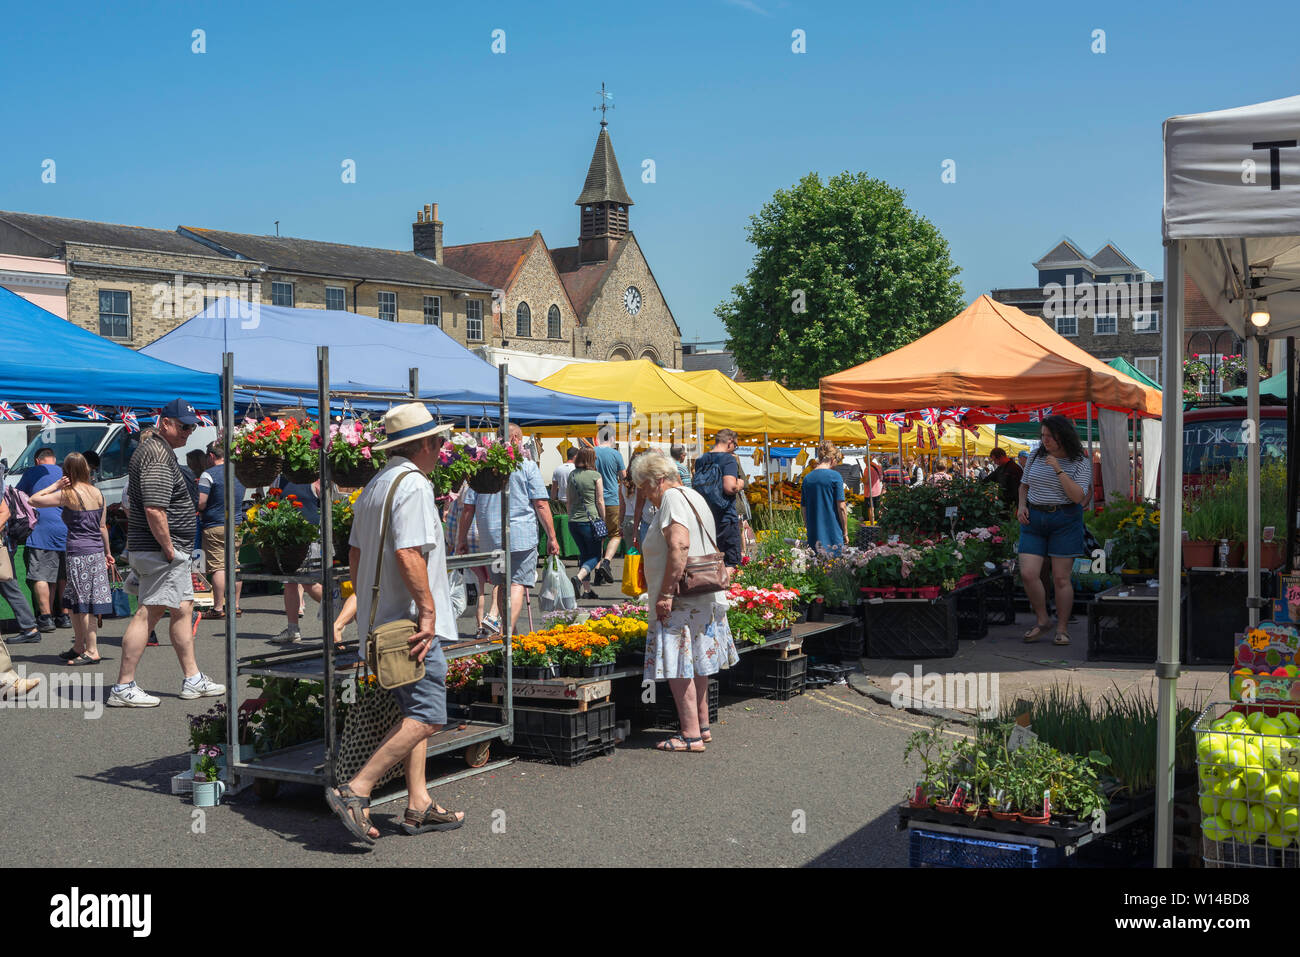 Bury St Edmunds market, view in summer of people shopping in the Saturday market in the centre of Bury St Edmunds, Suffolk, East Anglia, UK. Stock Photo